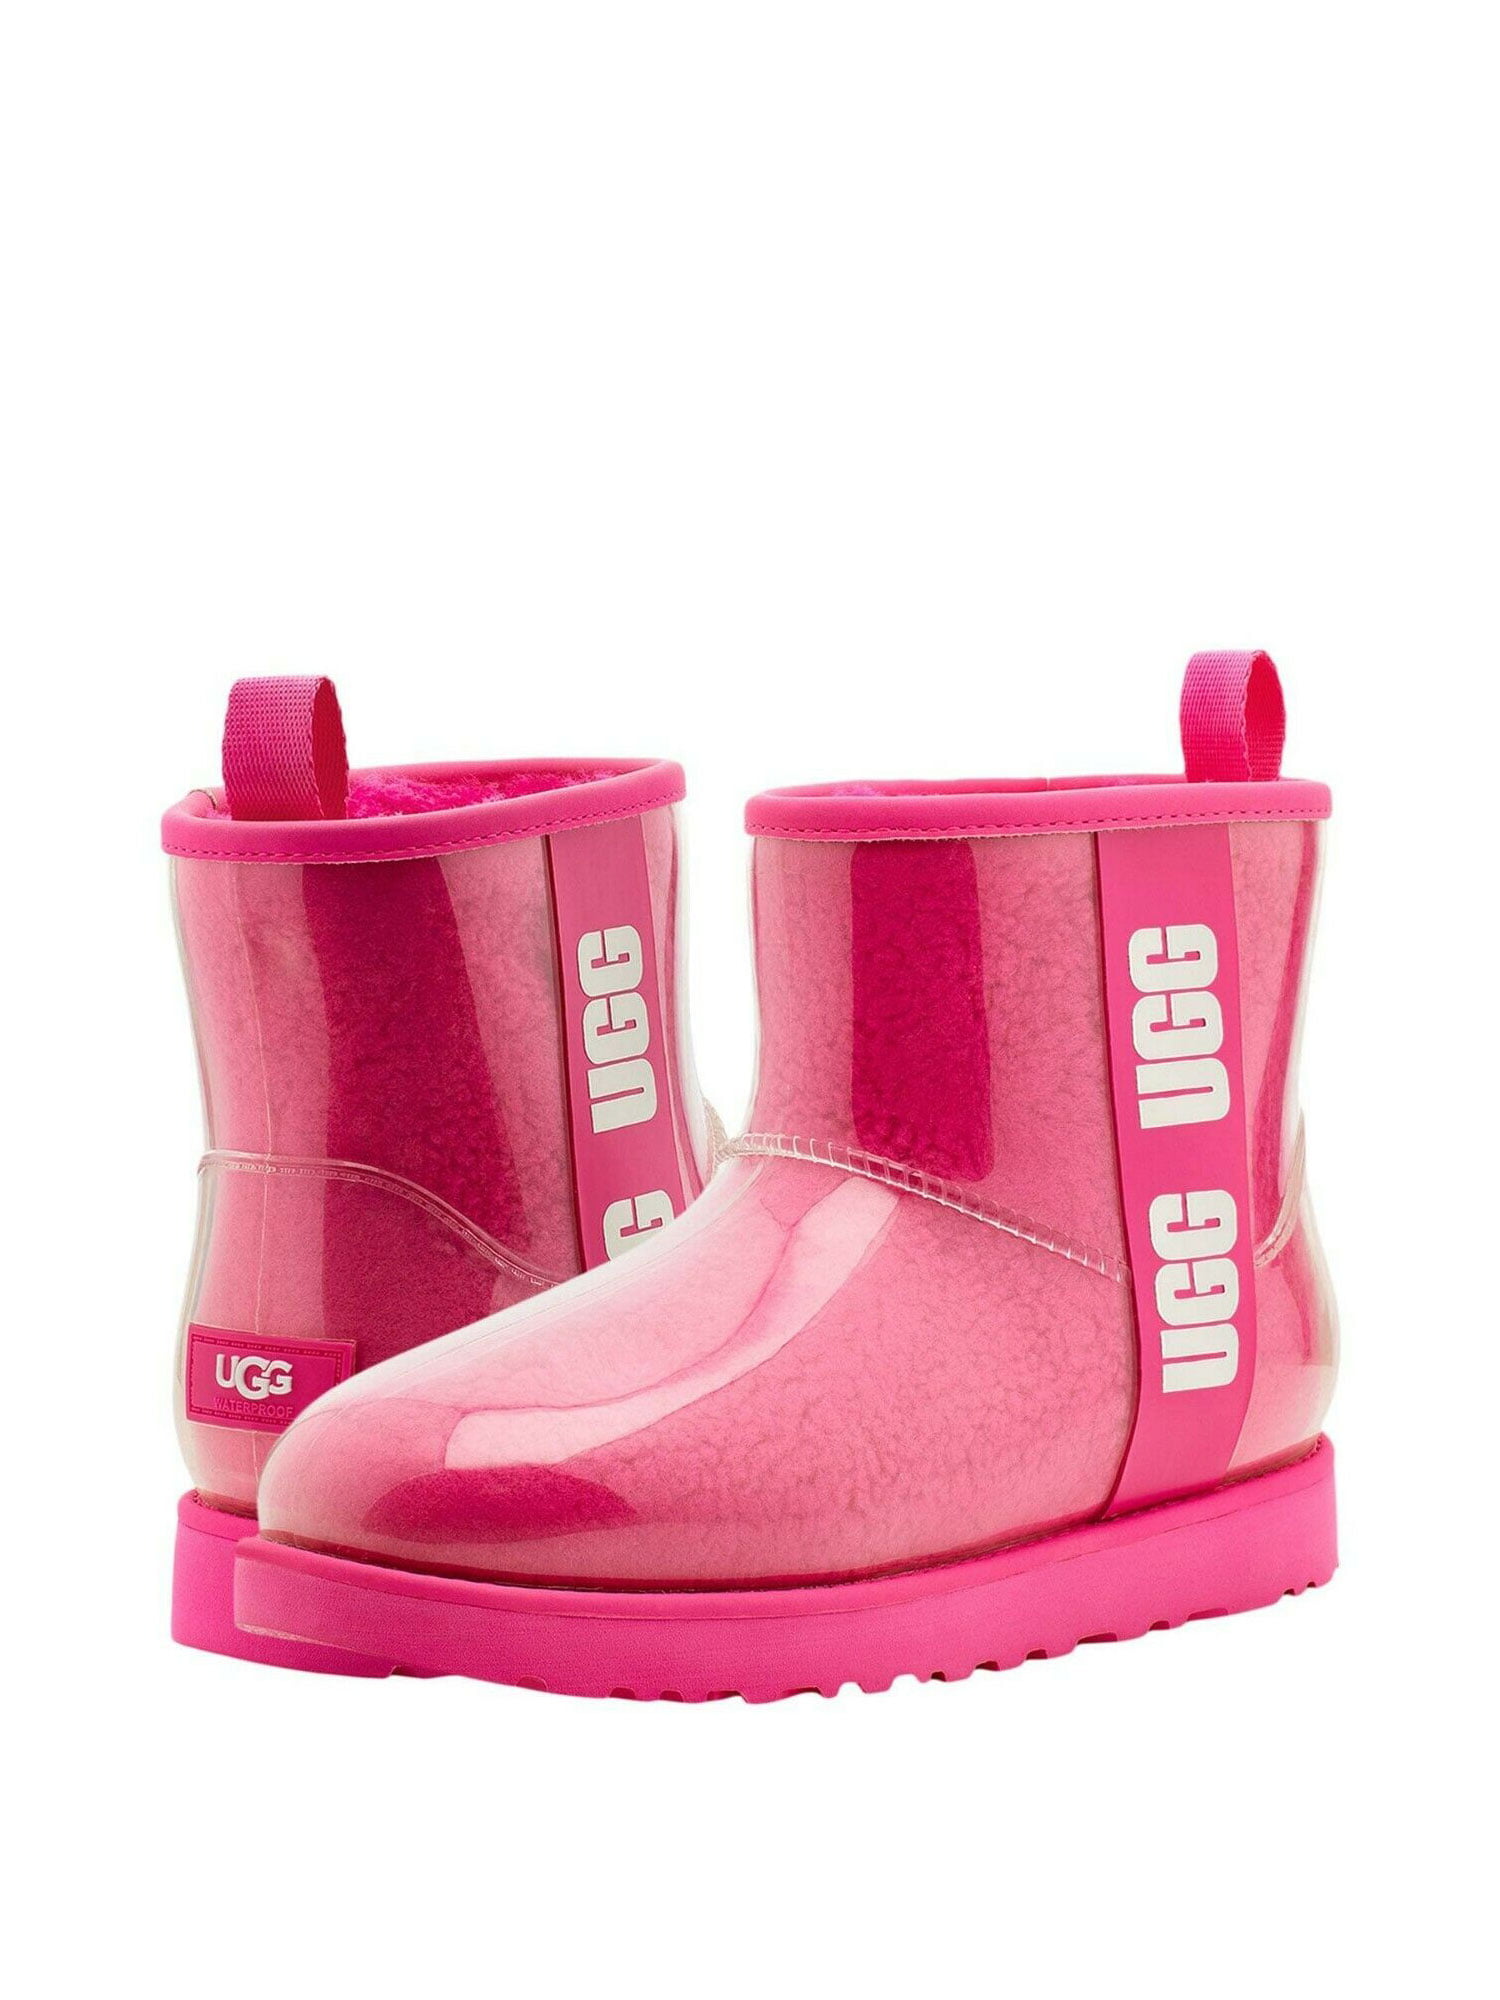 Buy > ugg plastic boots > in stock